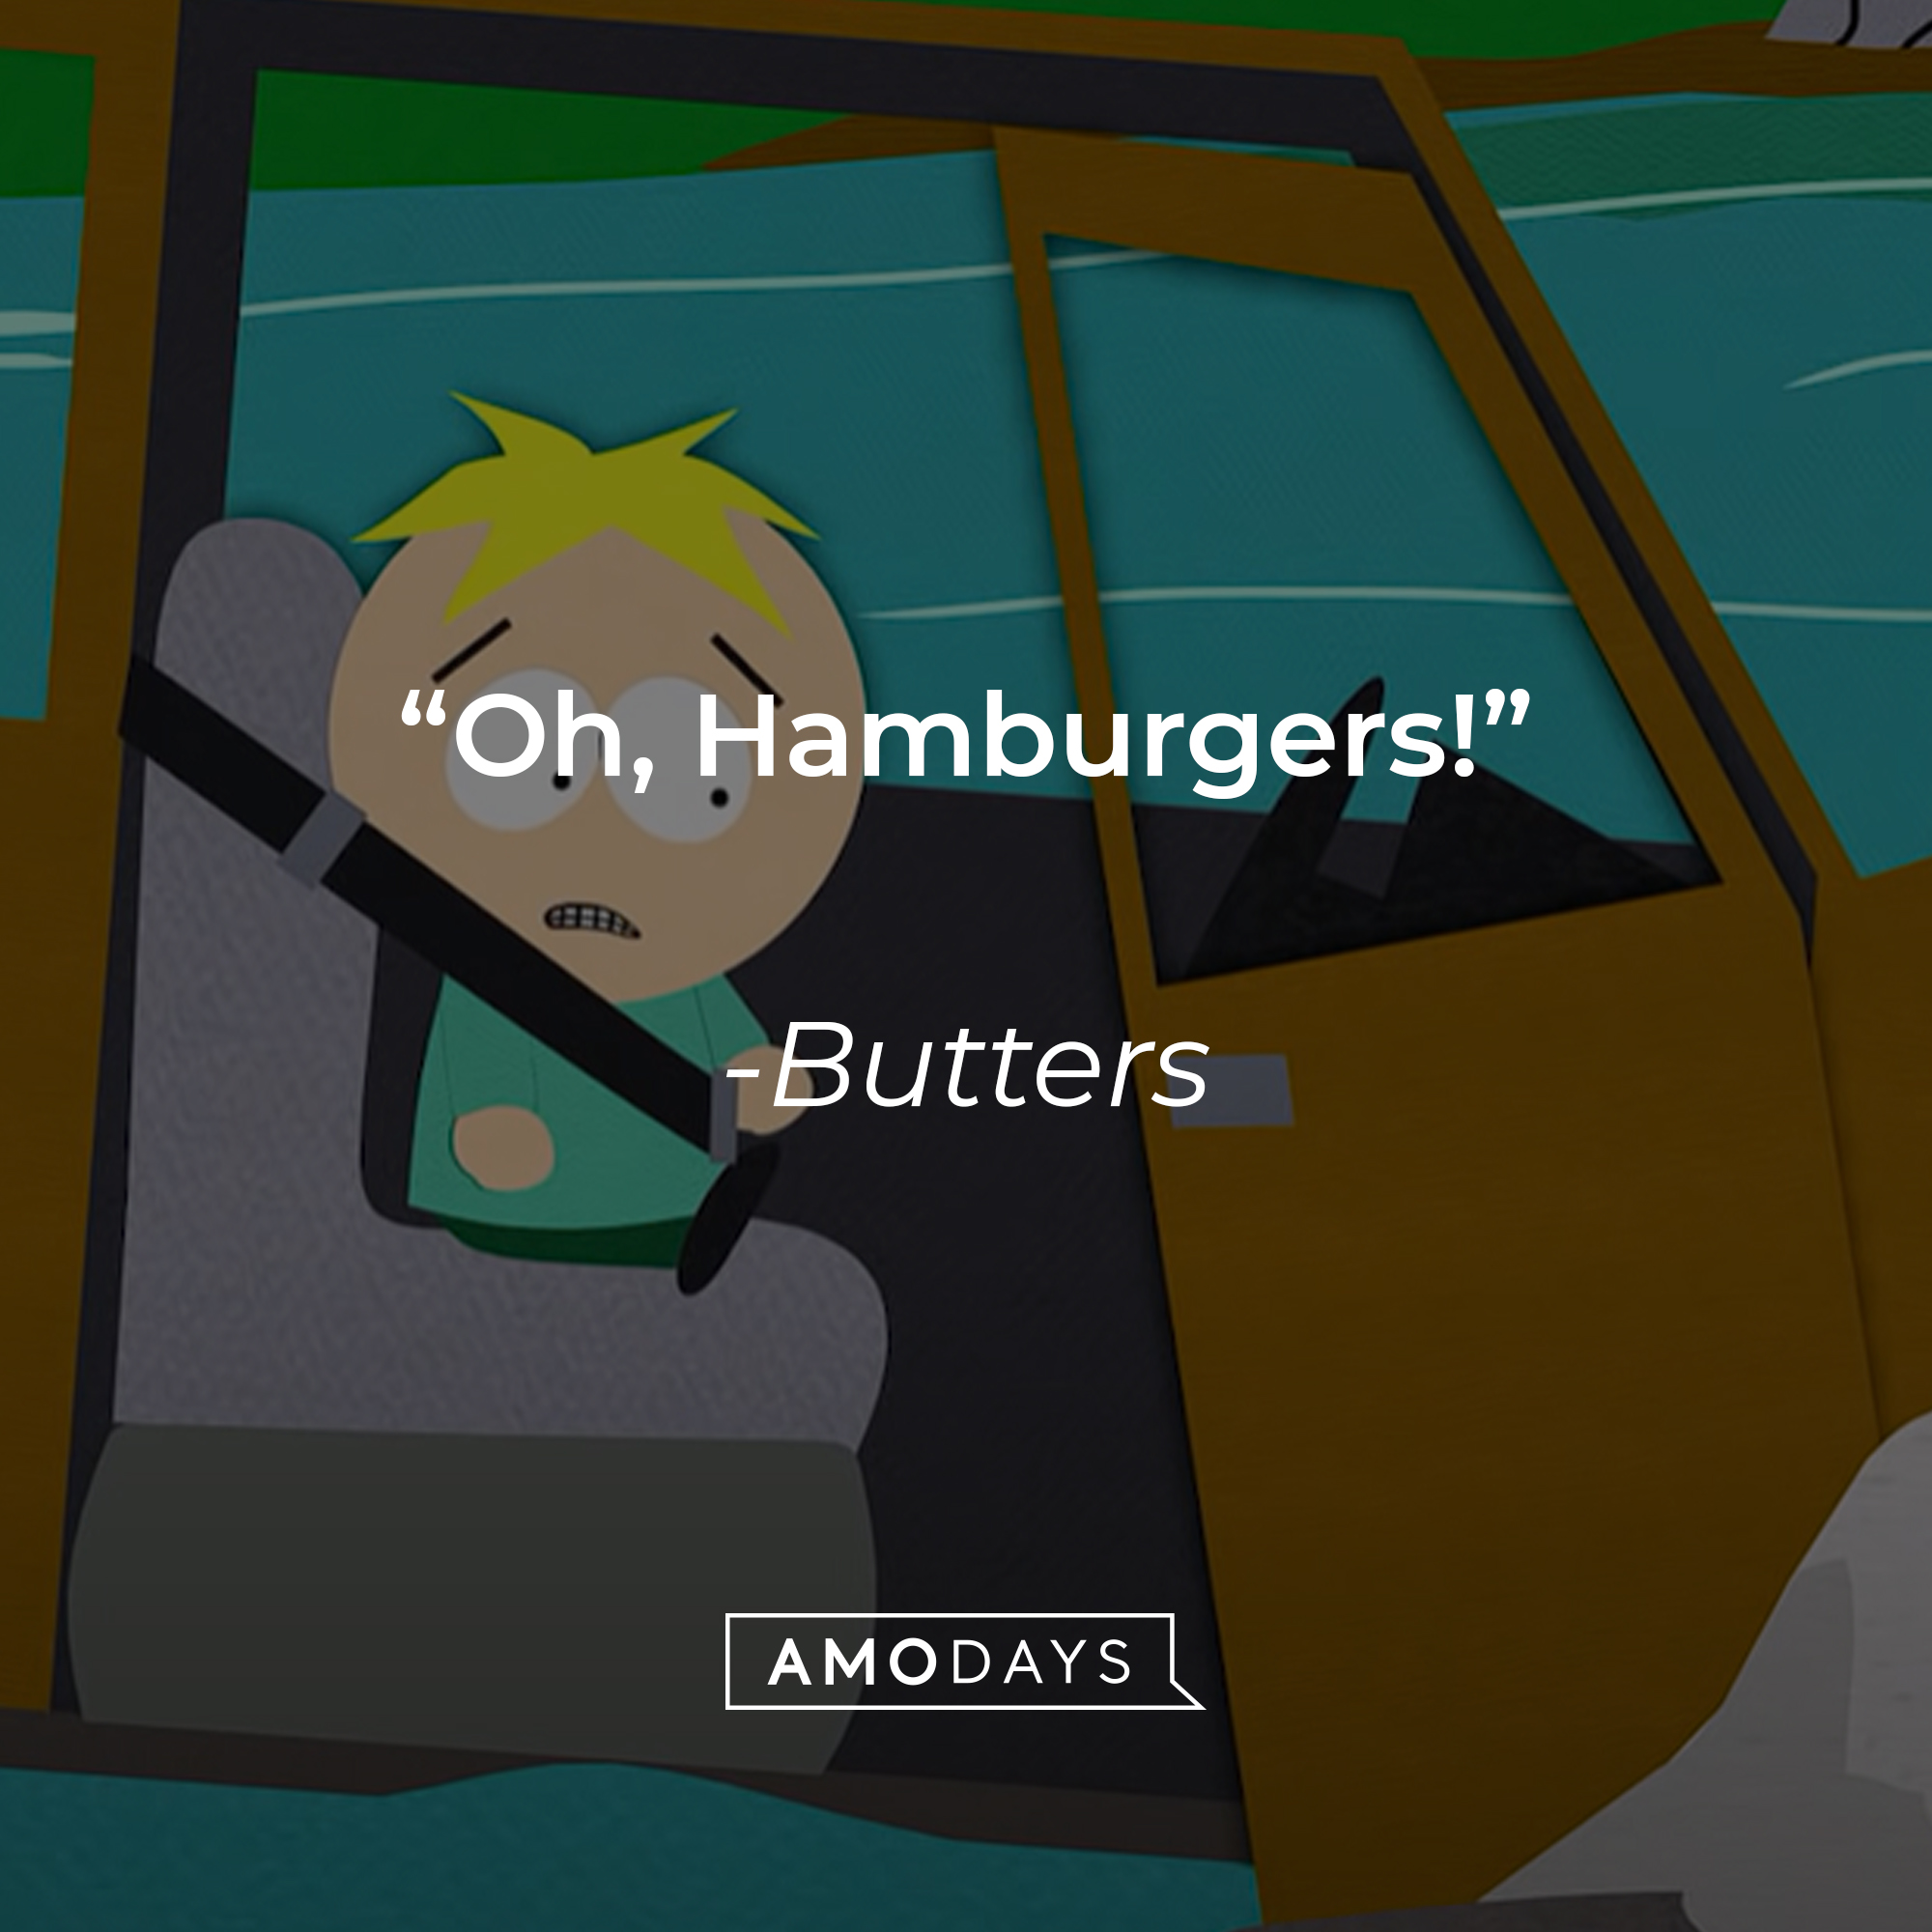 Butters' quote: "Oh, Hamburgers!" | Source: youtube.com/southpark